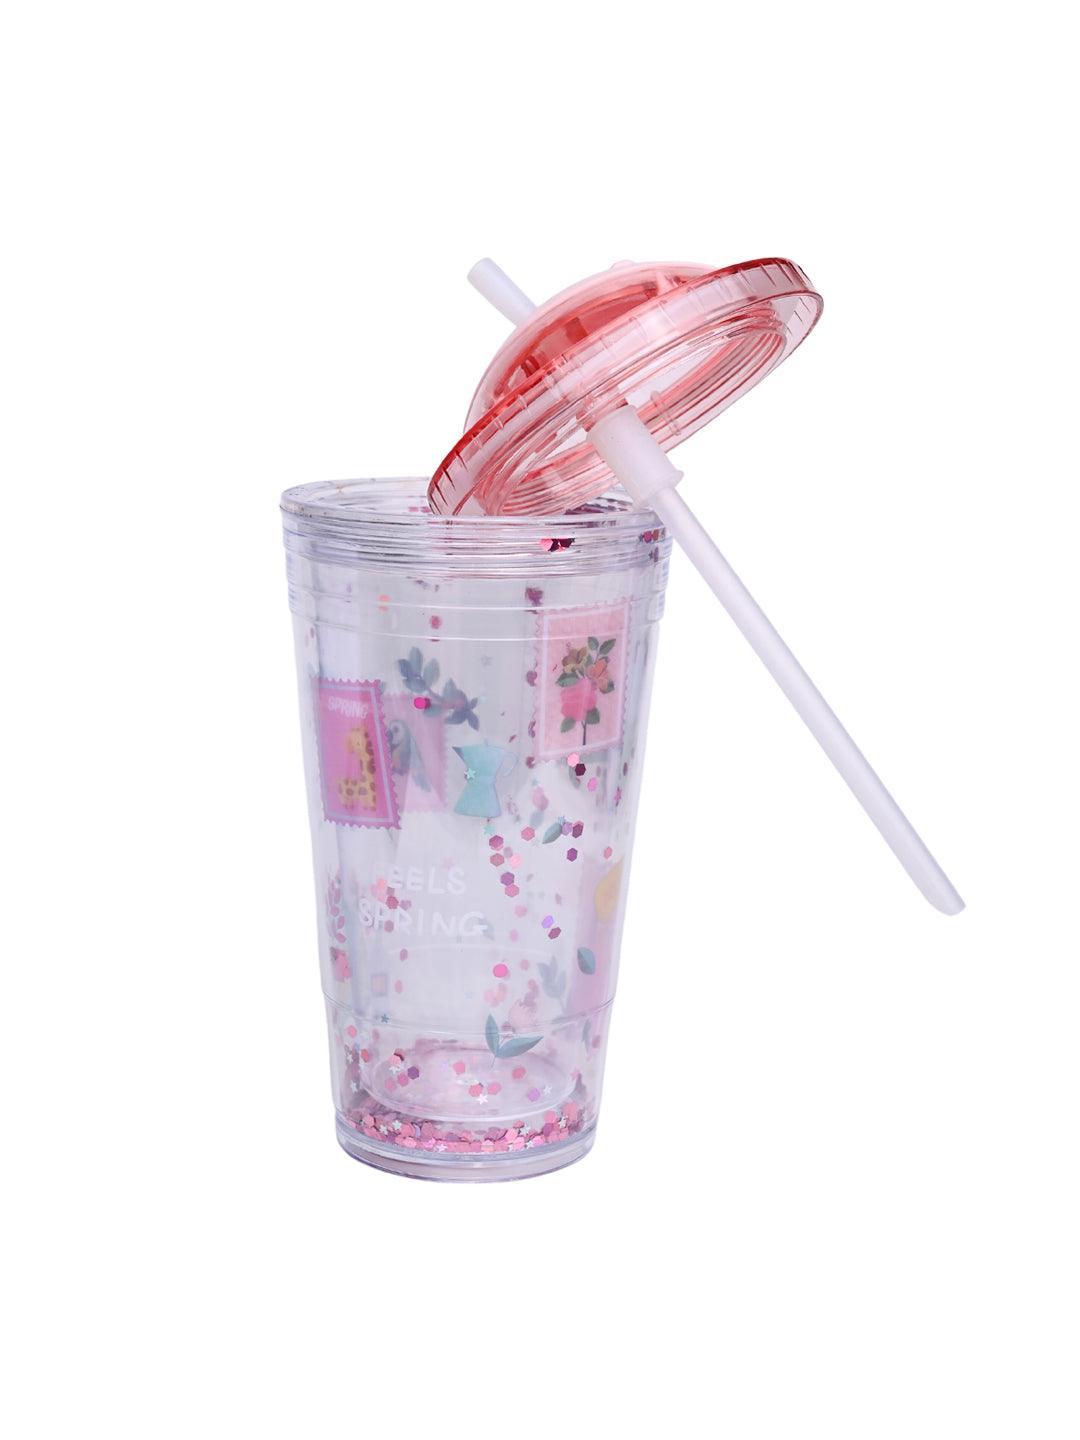 Reuseable Tumbler Sipper Cup - Pink, 450mL - MARKET 99